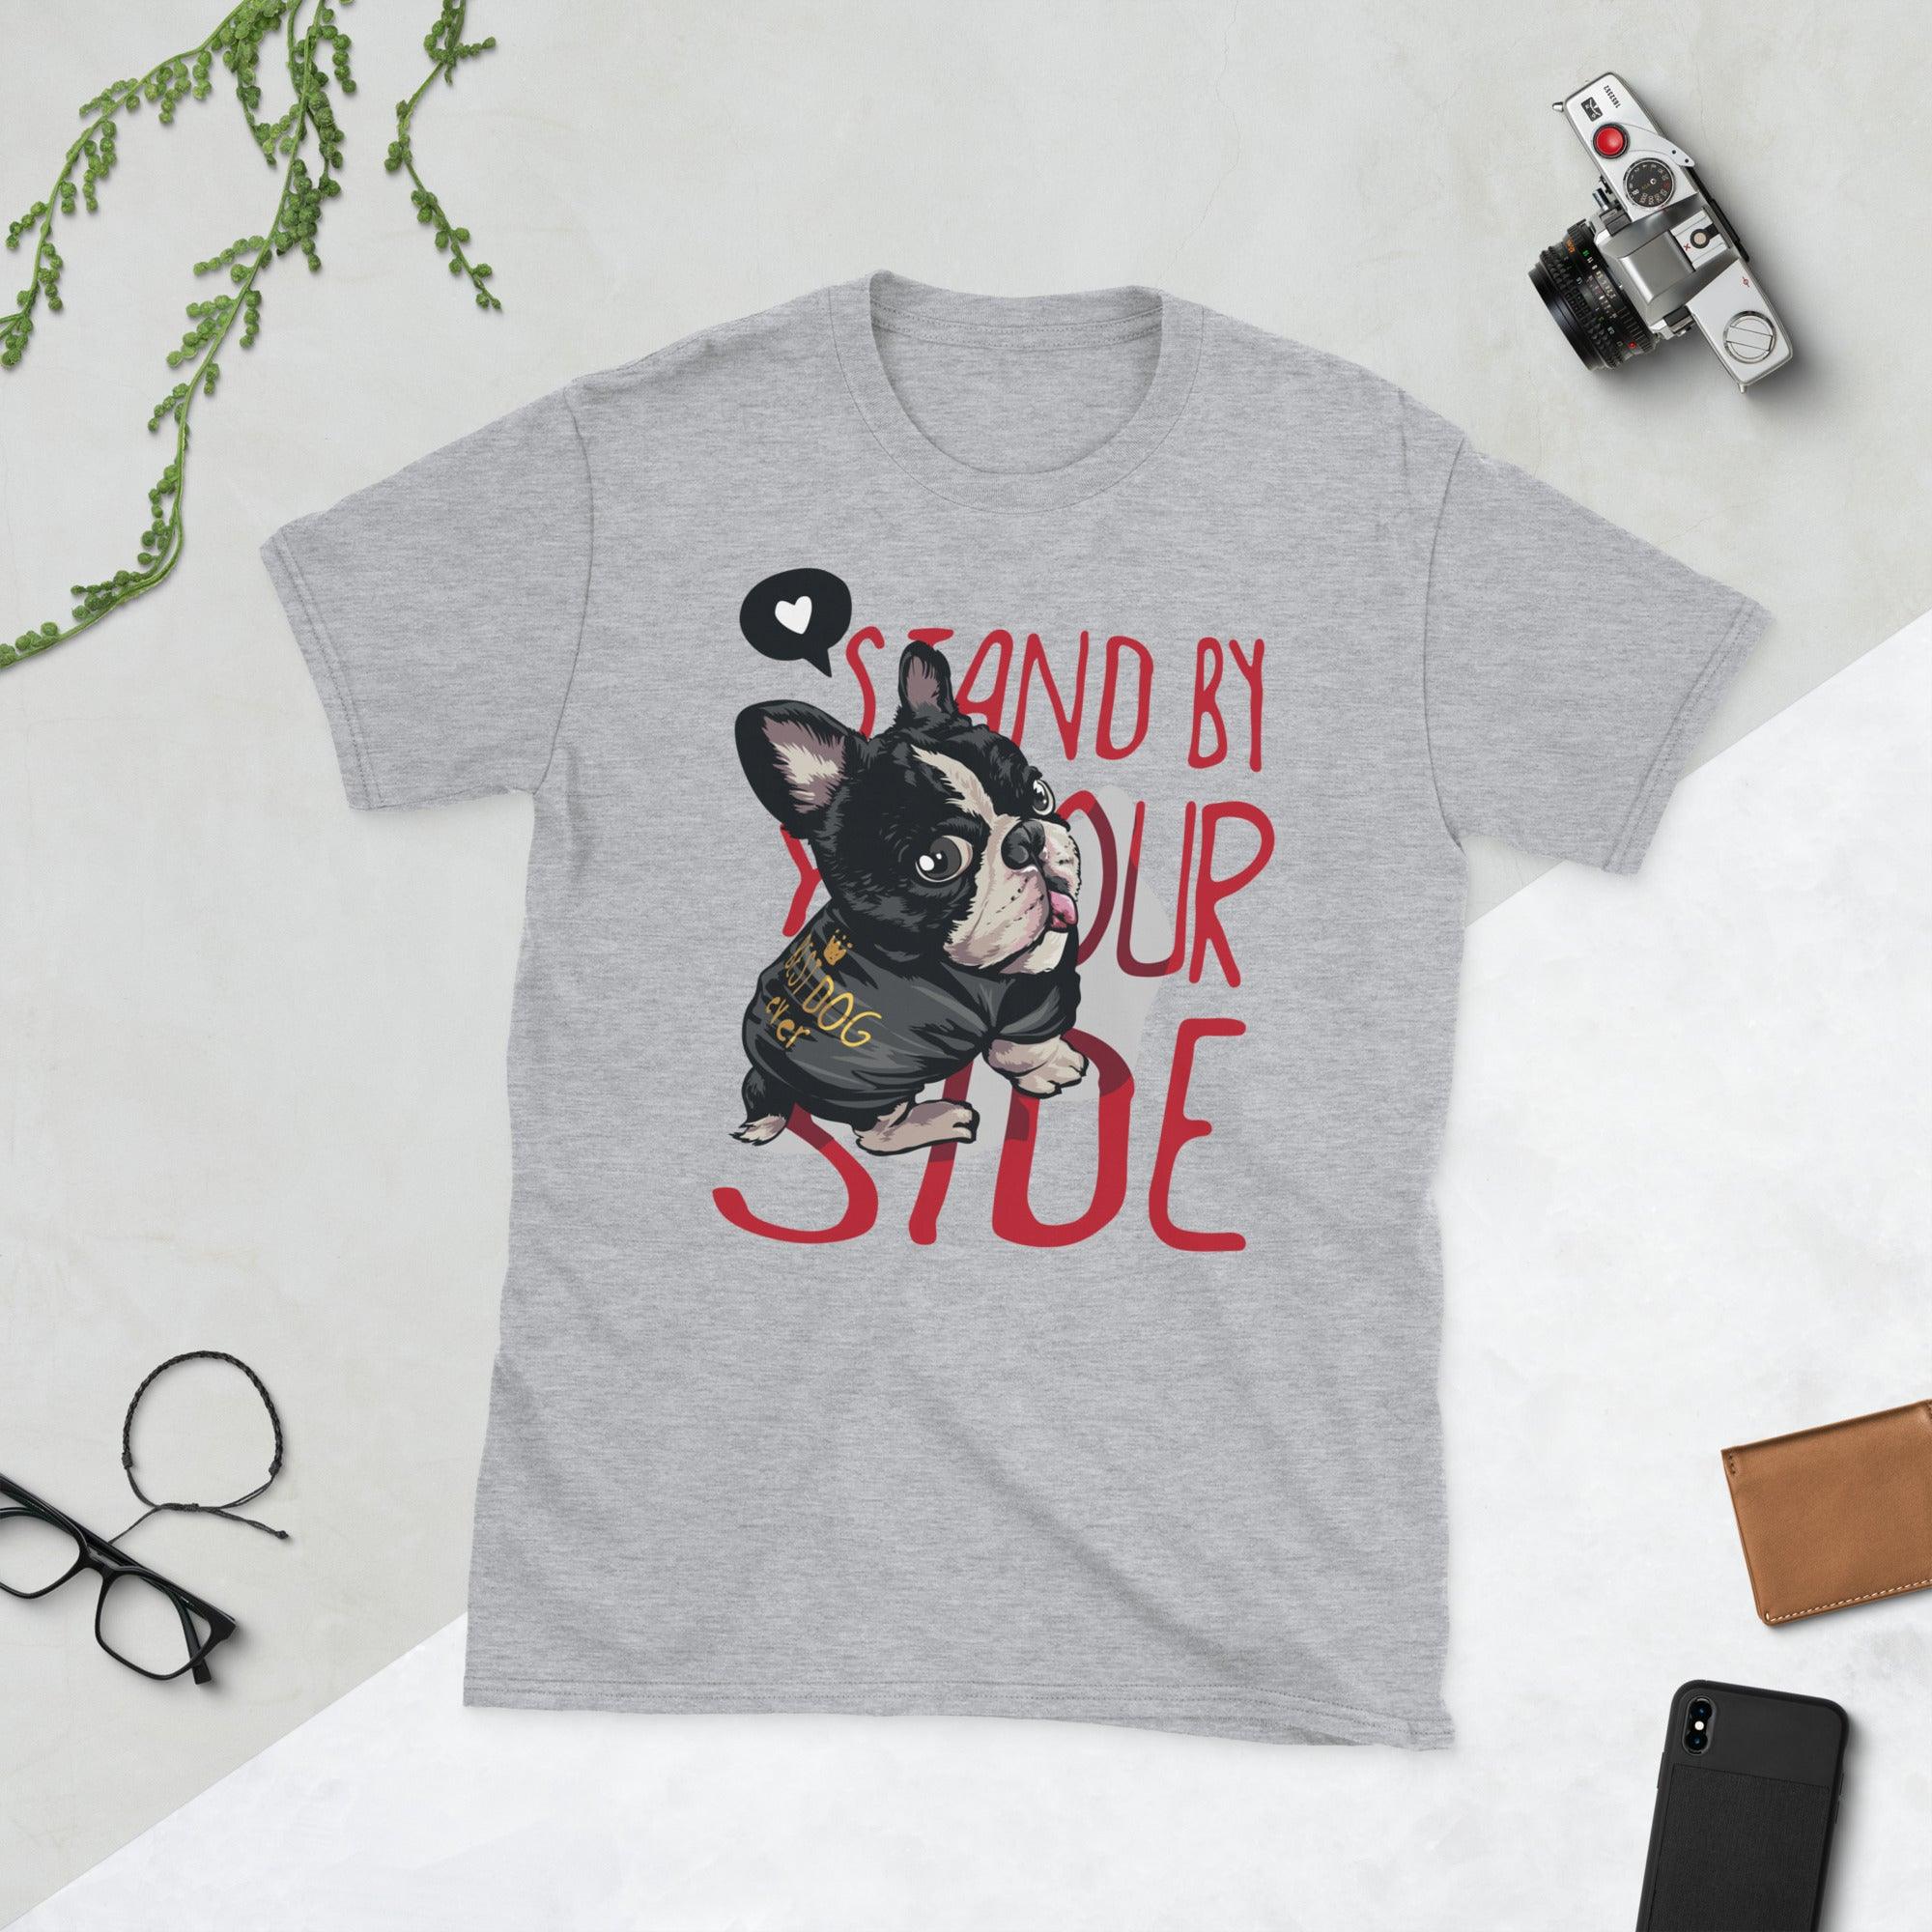 Short-Sleeve Unisex T-Shirt Stand By Your Side - Canvazon